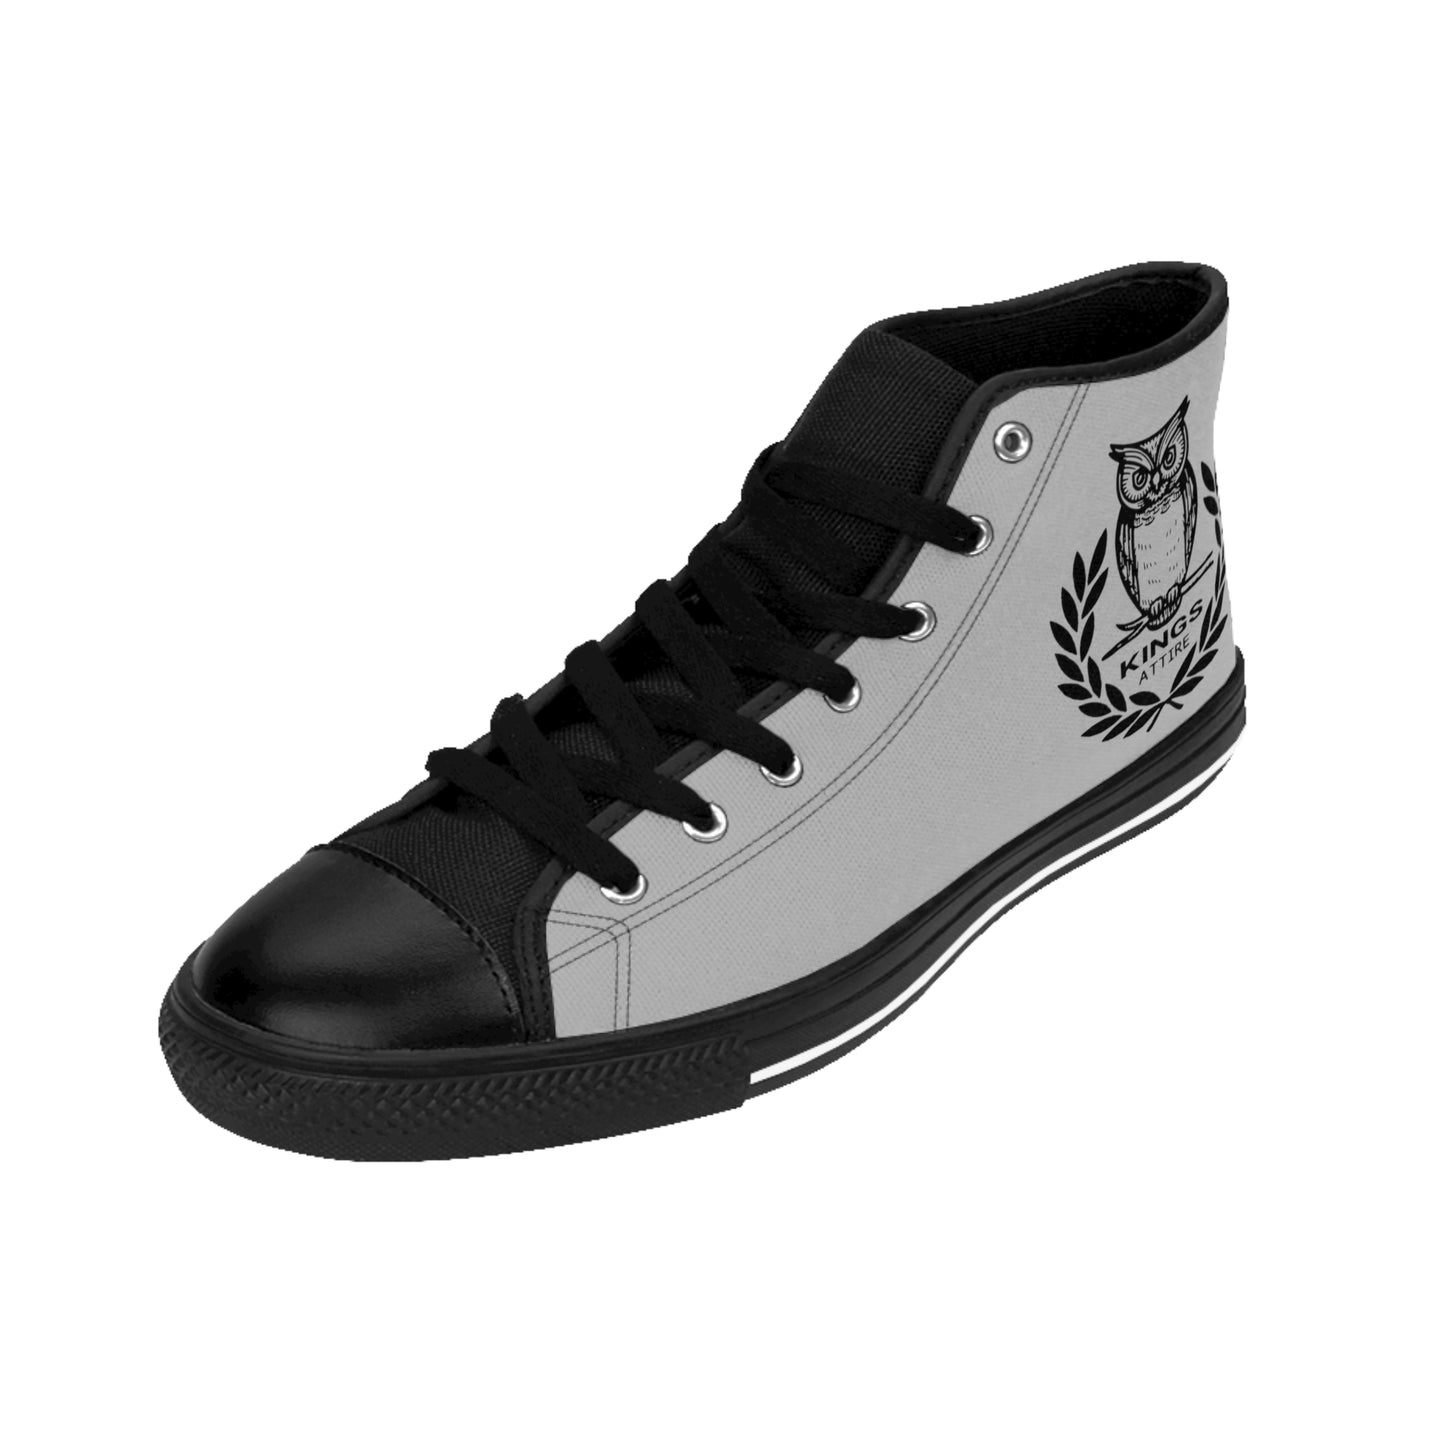 Kings Attire High Top shoes